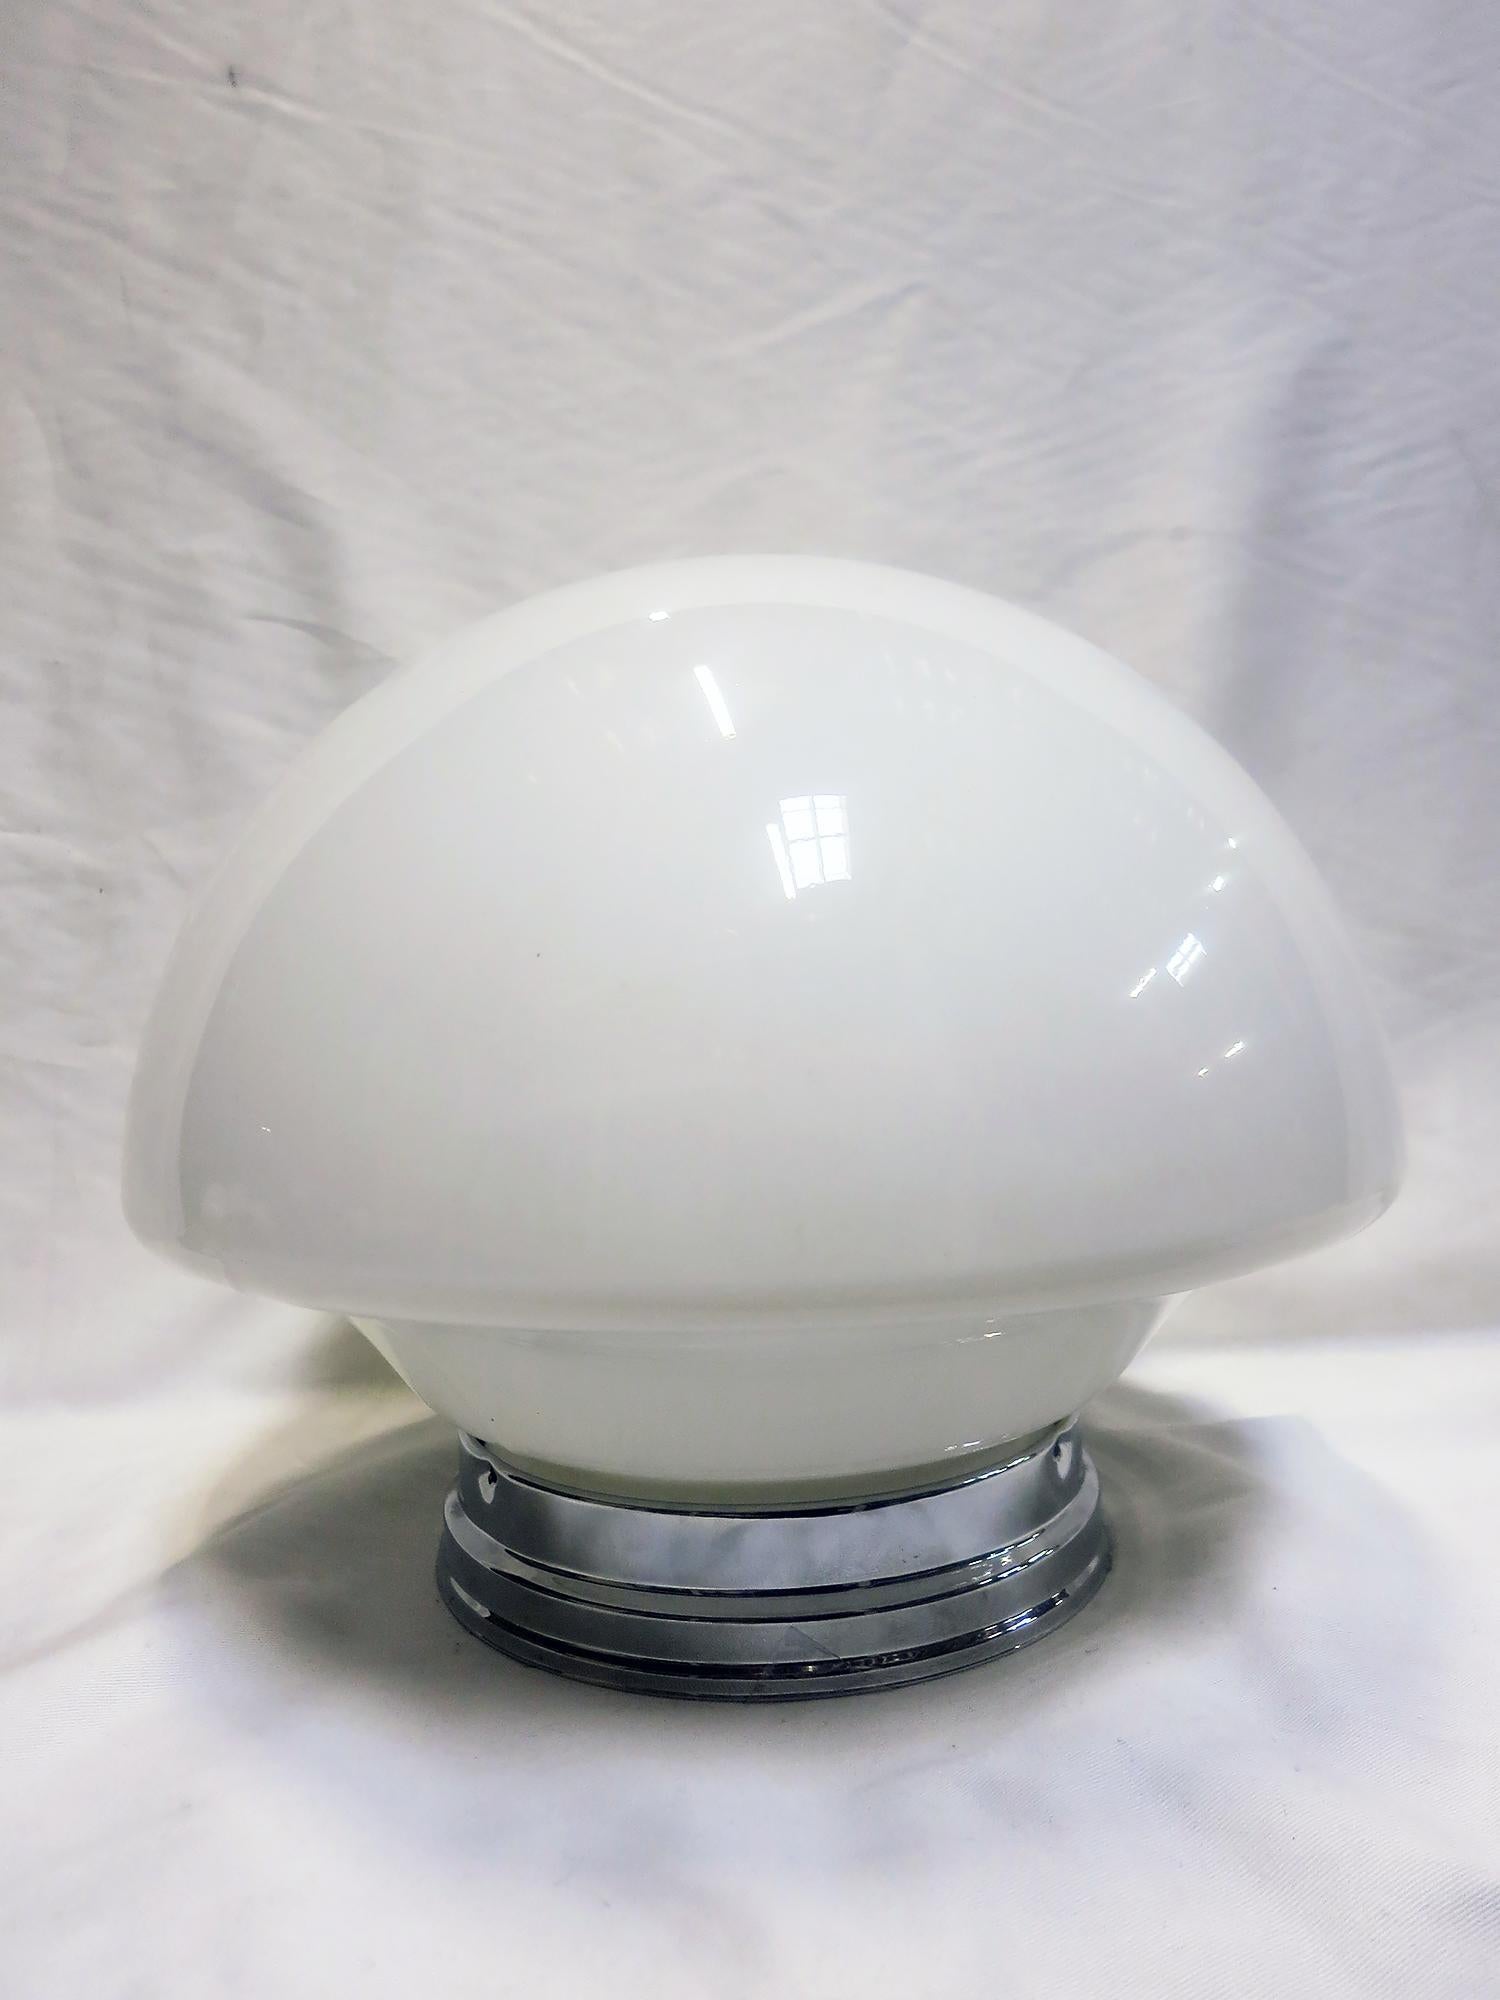 Once used everywhere from classrooms, libraries and courthouses alike, schoolhouse globes offered a practical and utilitarian design with solid, hard-working ambient lighting. Our globe features a rounded bell-shape in Classic white milk glass that